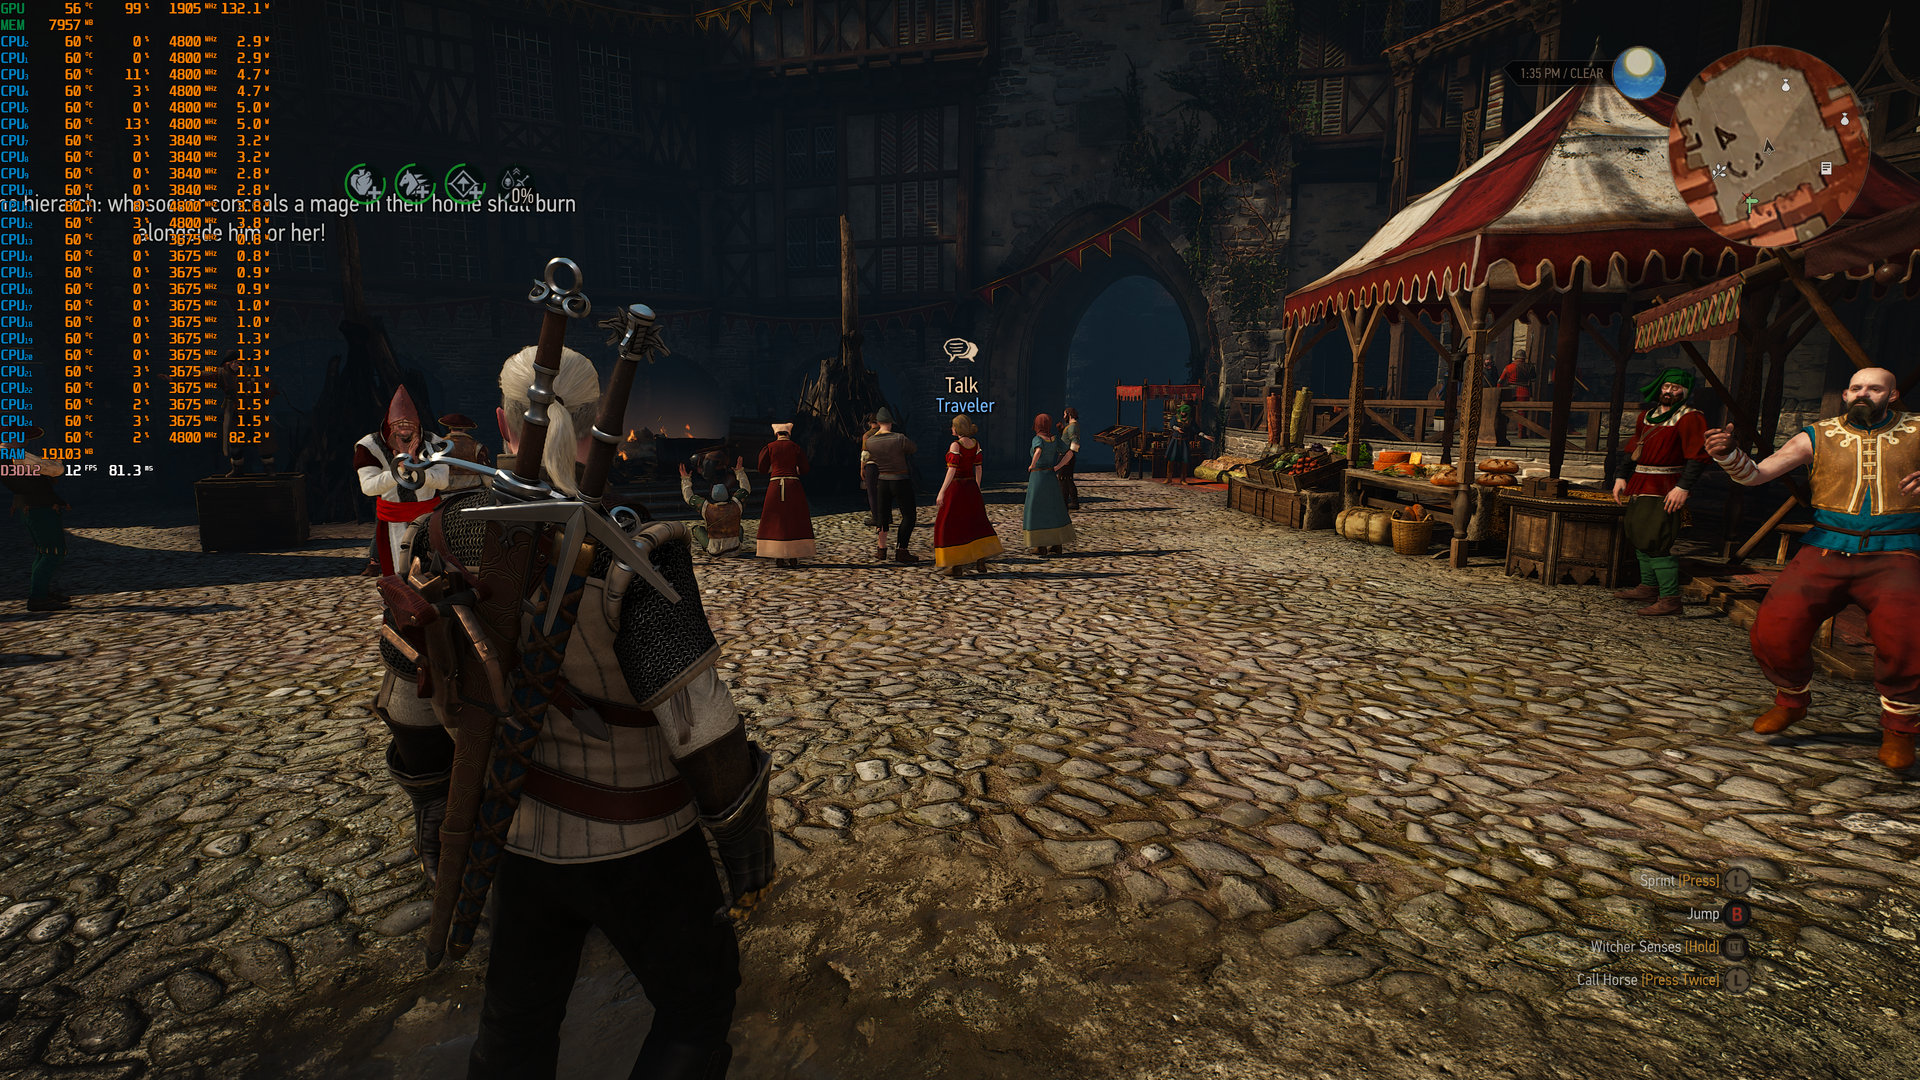 rsz_the_witcher_3_screenshot_20221224_-_09310704.png